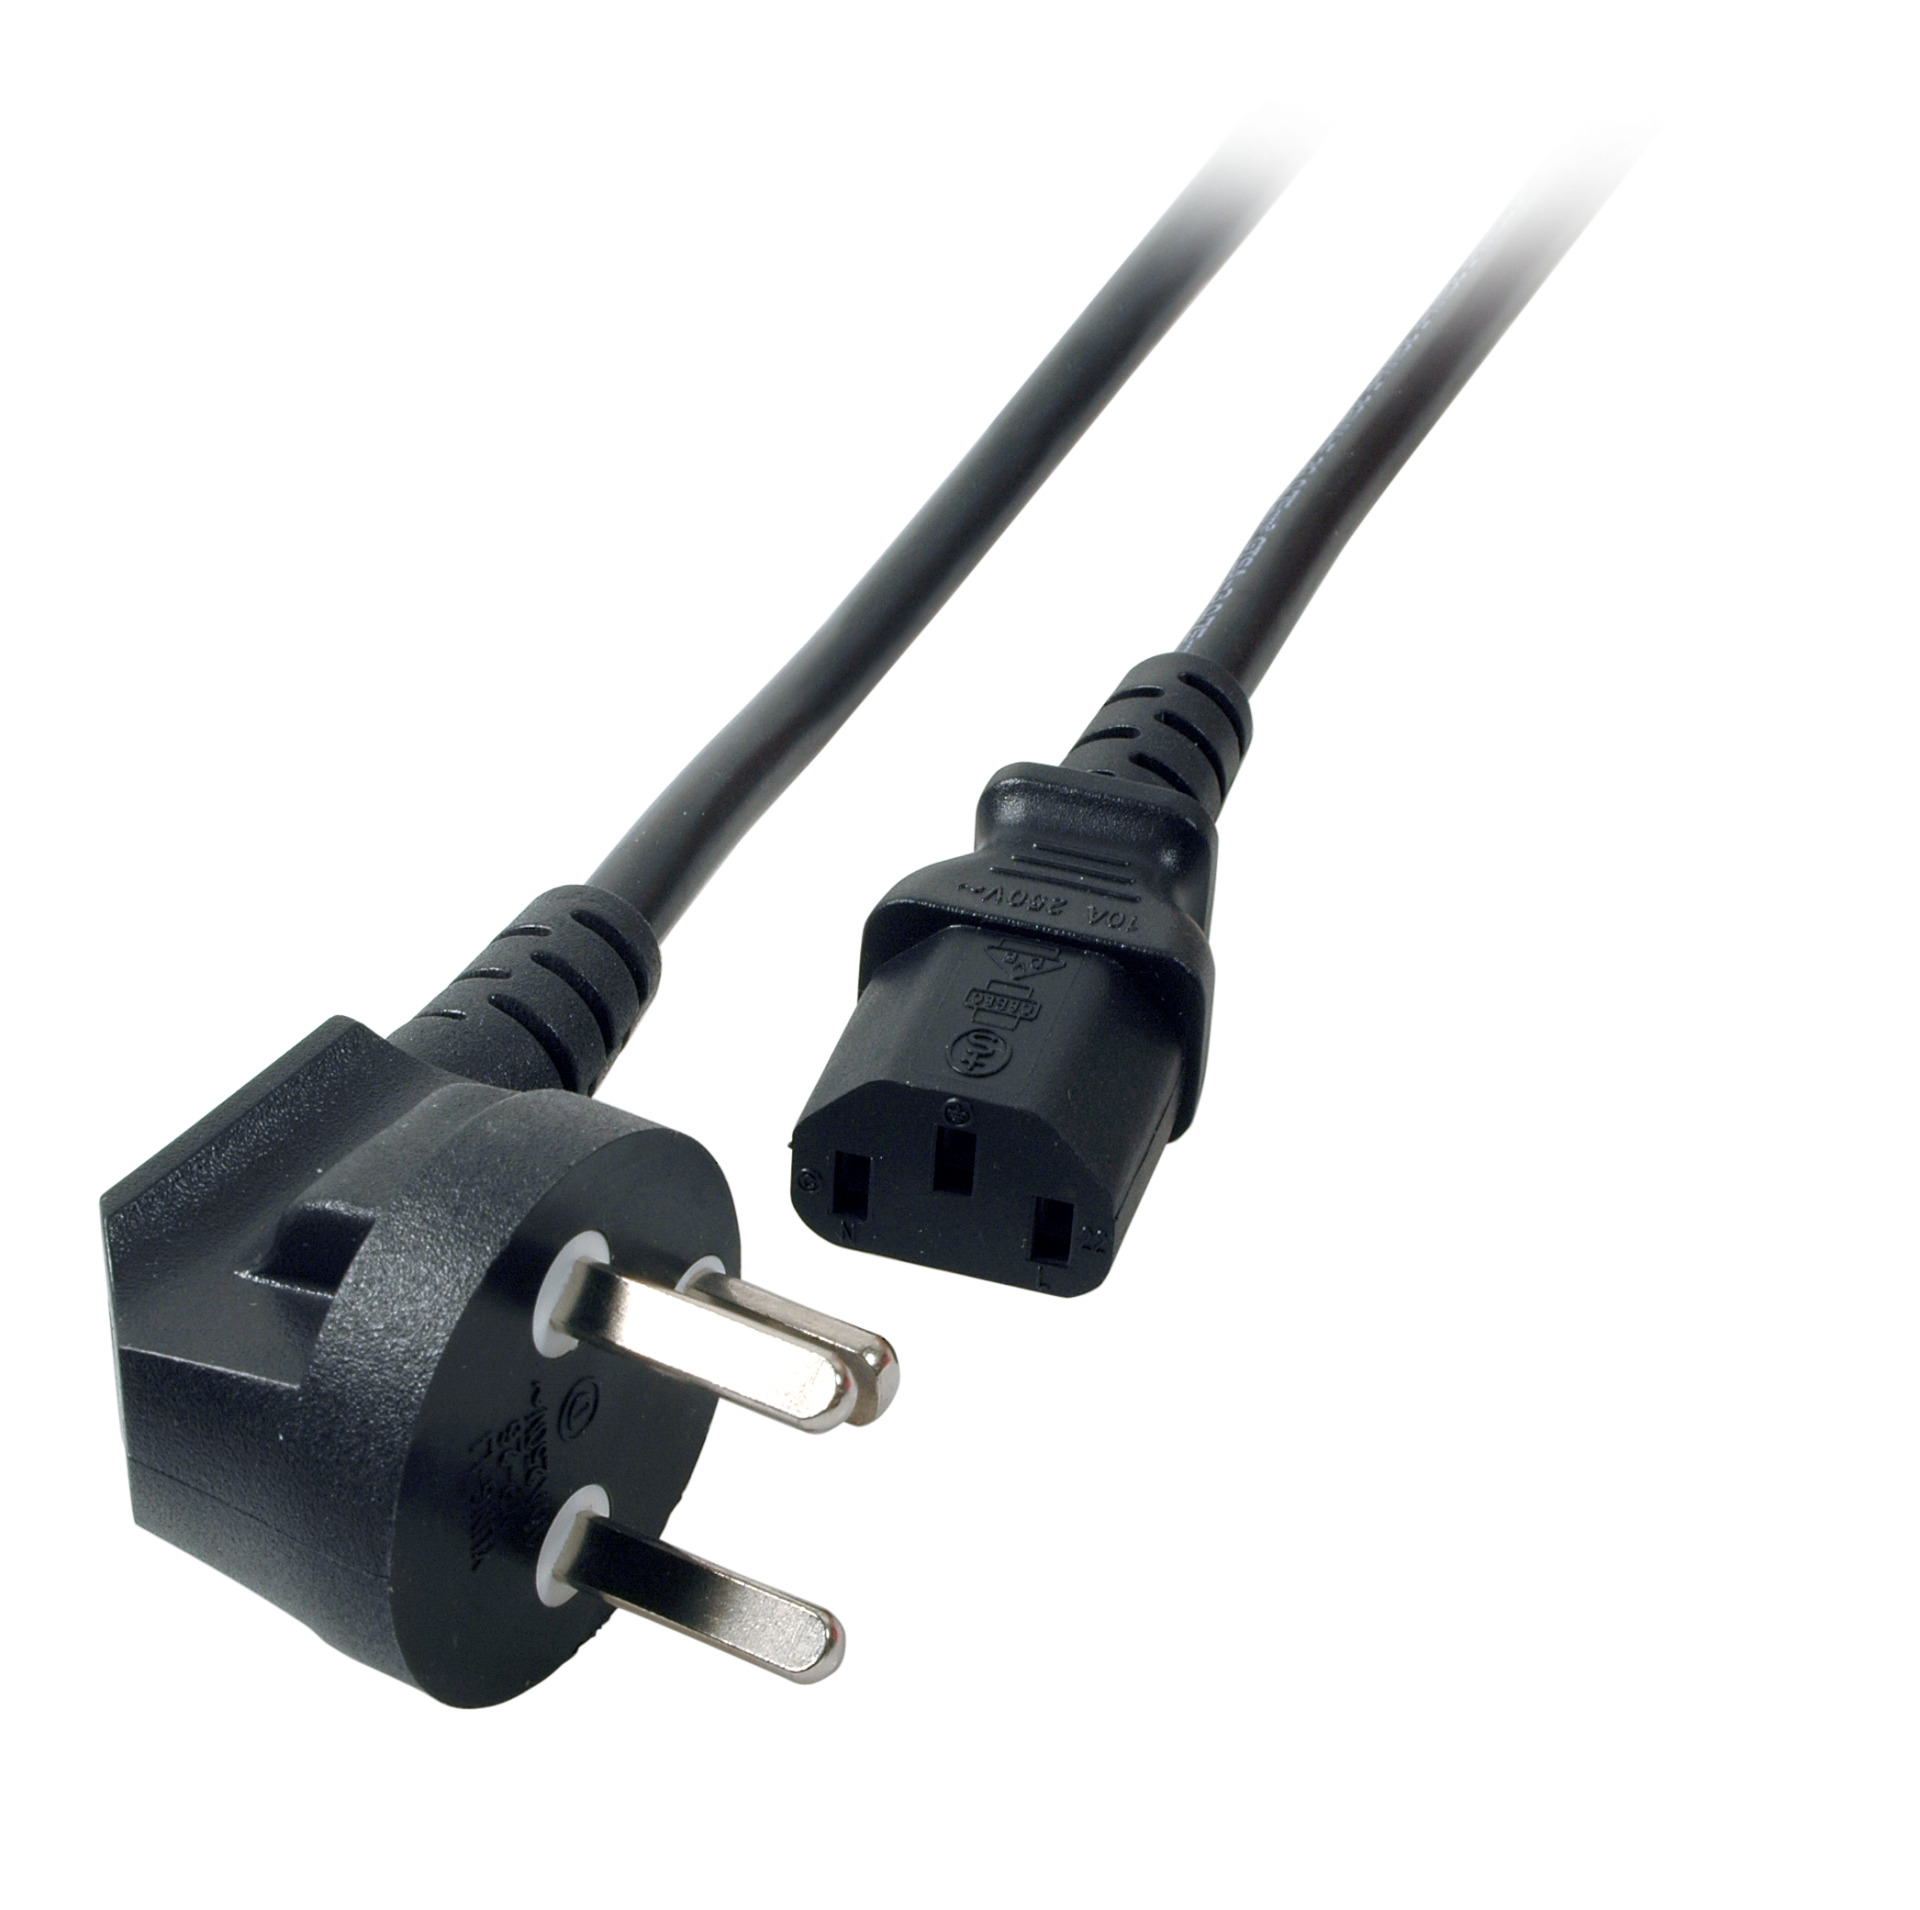 Power Cable Denmark DPin 90° - C13 180°, Black, 3.0 m, 3 x 0.75 mm²